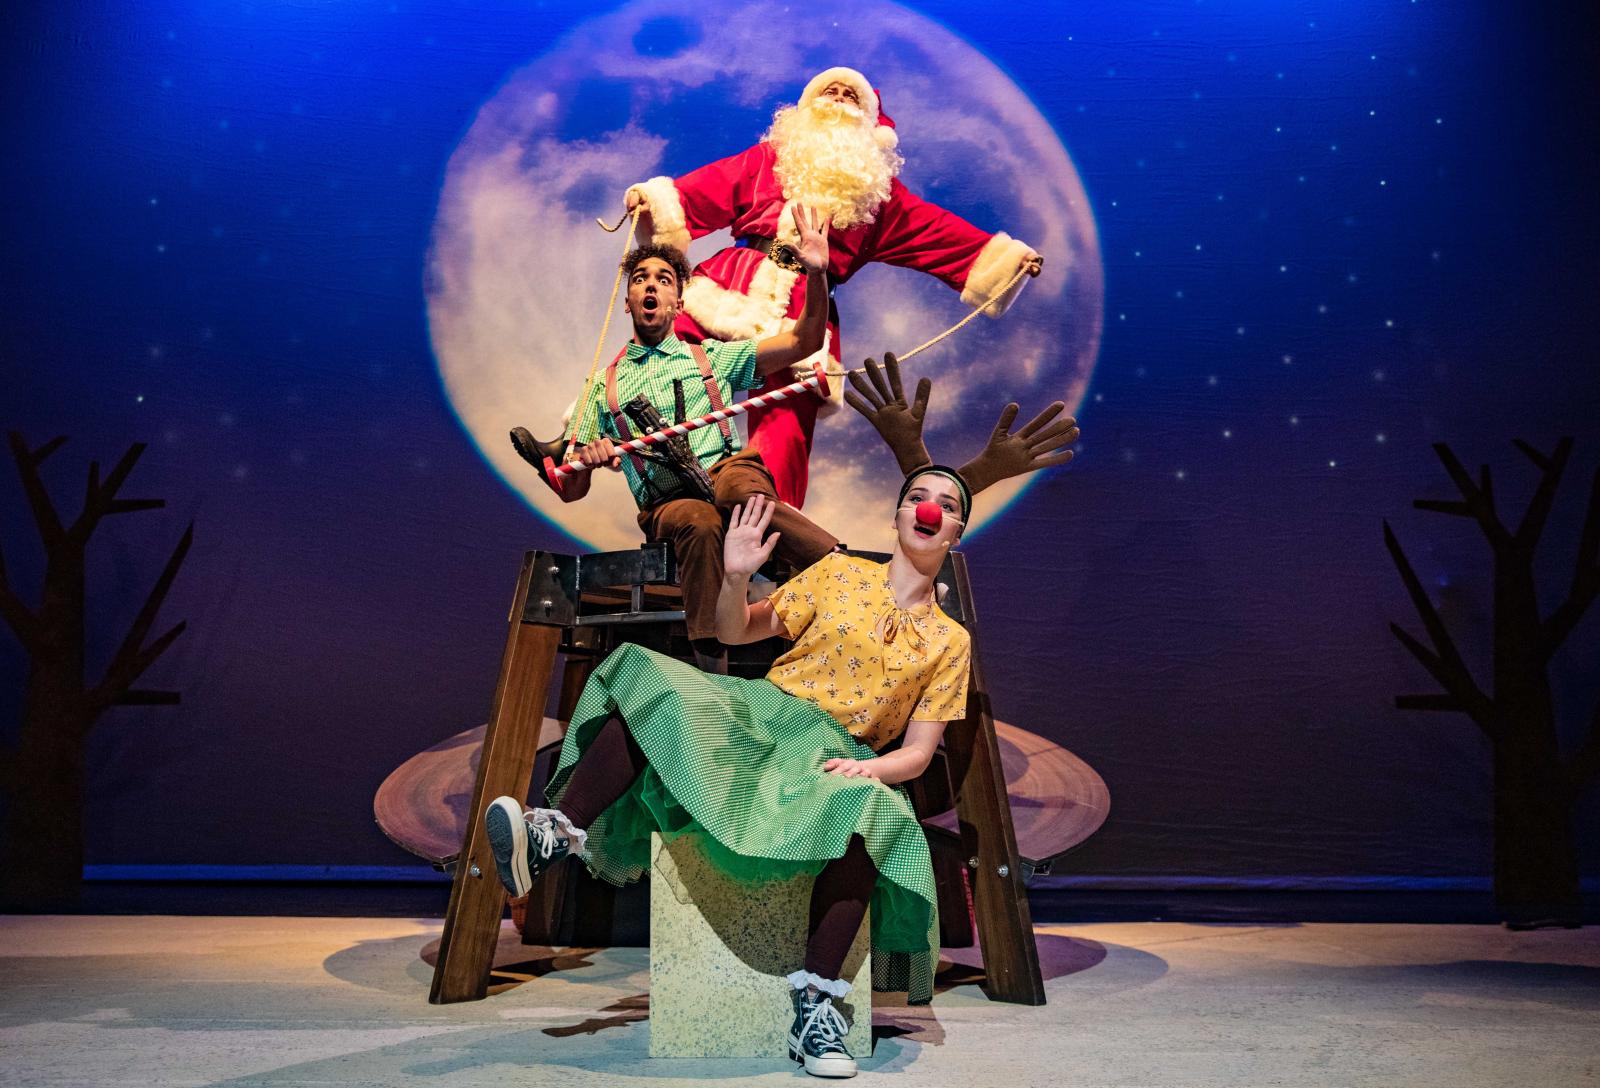 Three actors dancing on stage, including one dressed as Santa Claus.